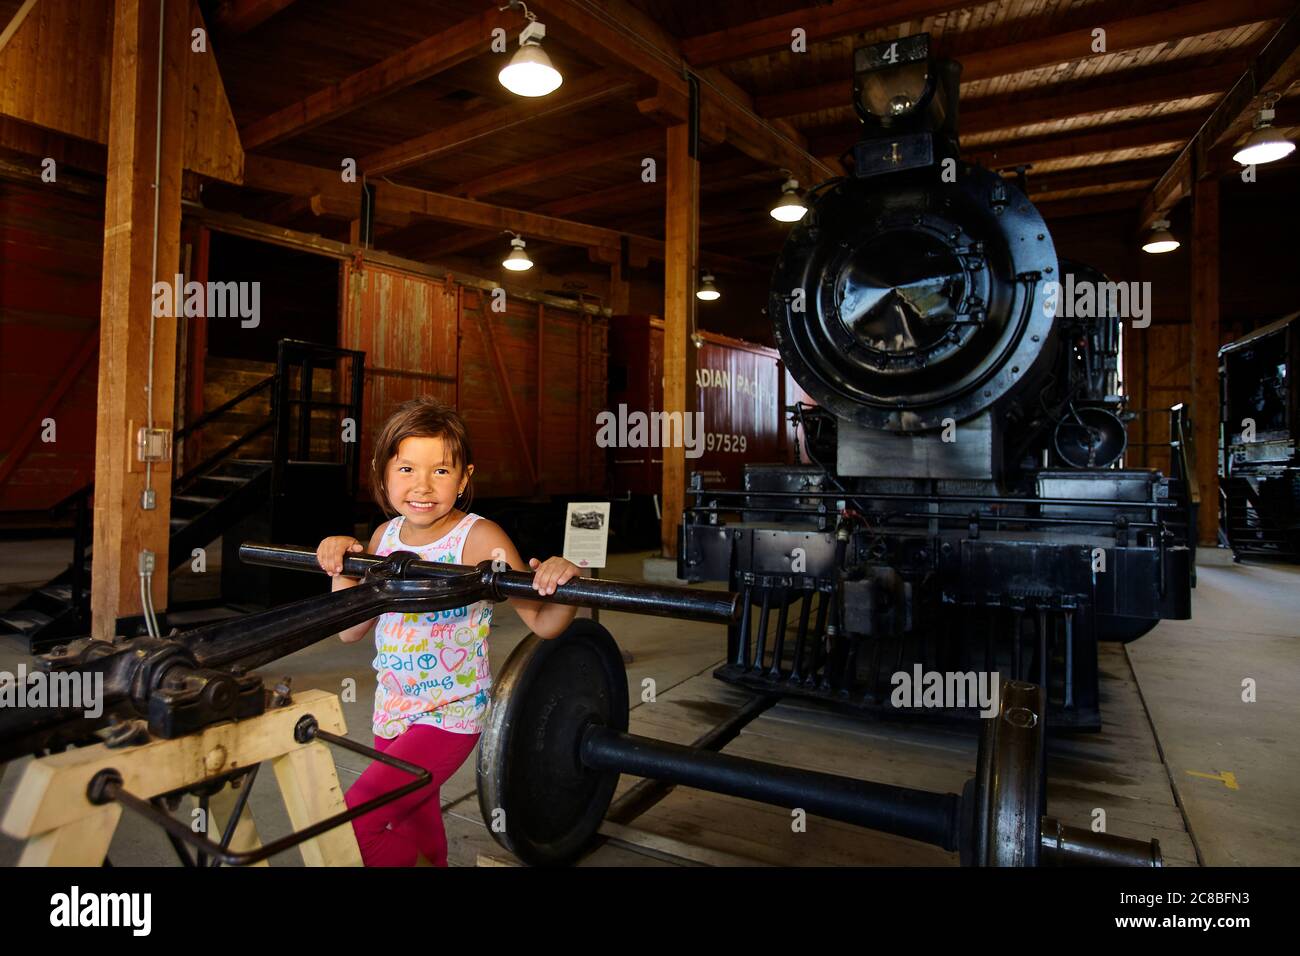 Young girl posing in front of an old steam train in a train shed. Stock Photo